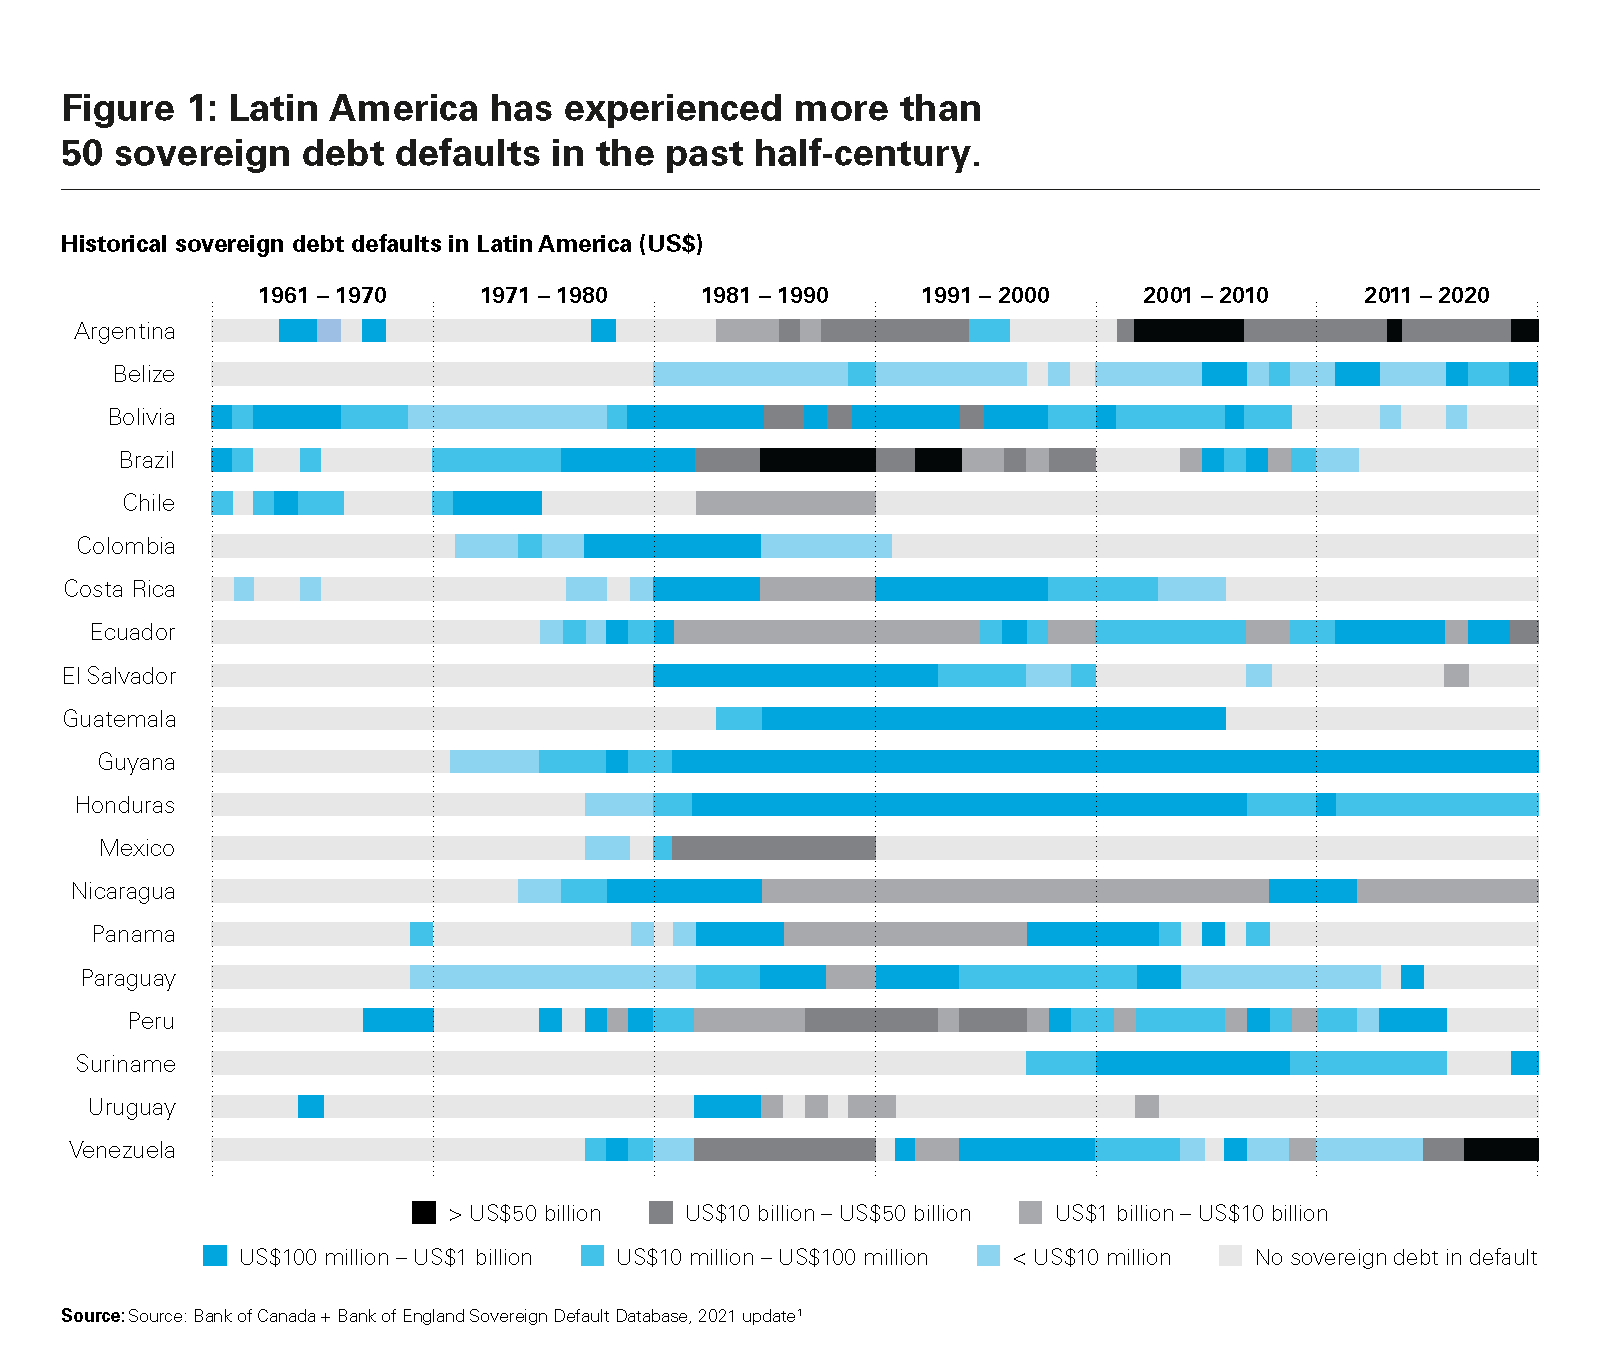 Latin America has experienced has experienced more than 50 sovereign debt defaults